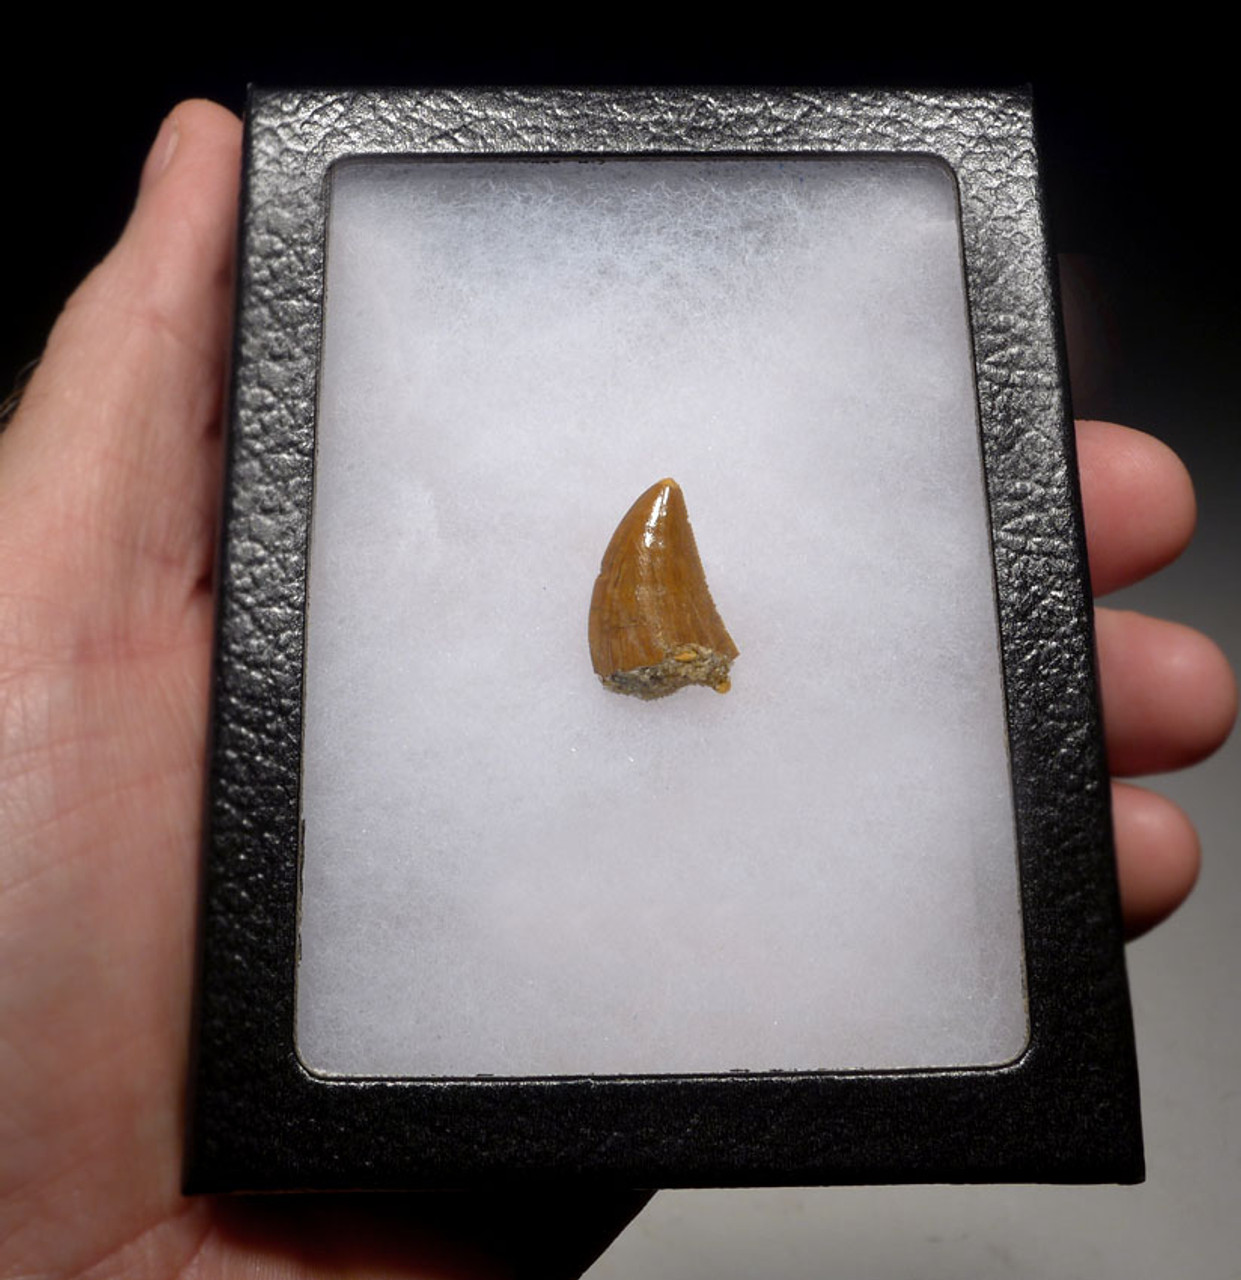 CHOICE DELTADROMEUS FOSSIL DINOSAUR TOOTH WITH SERRATIONS  *DT11-038